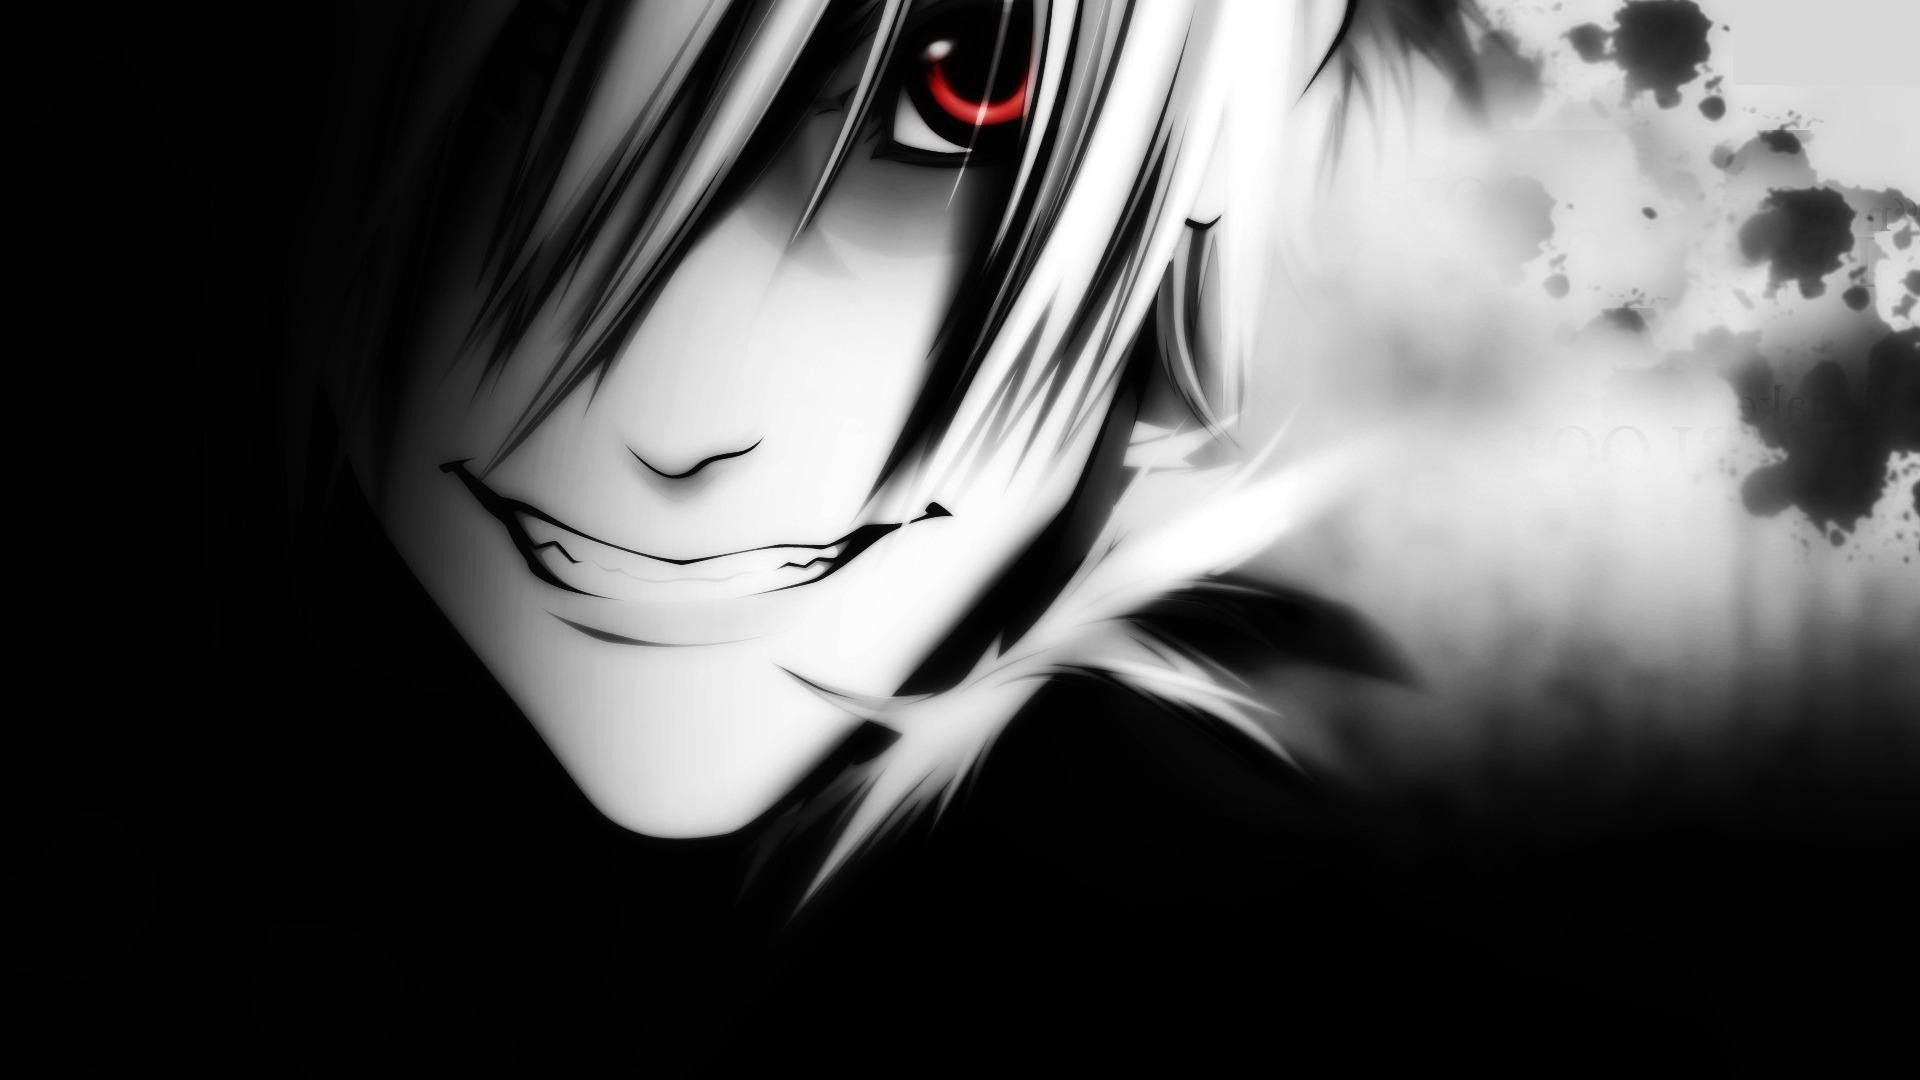 Anime wallpaper death note 1400x1050 16250 fr